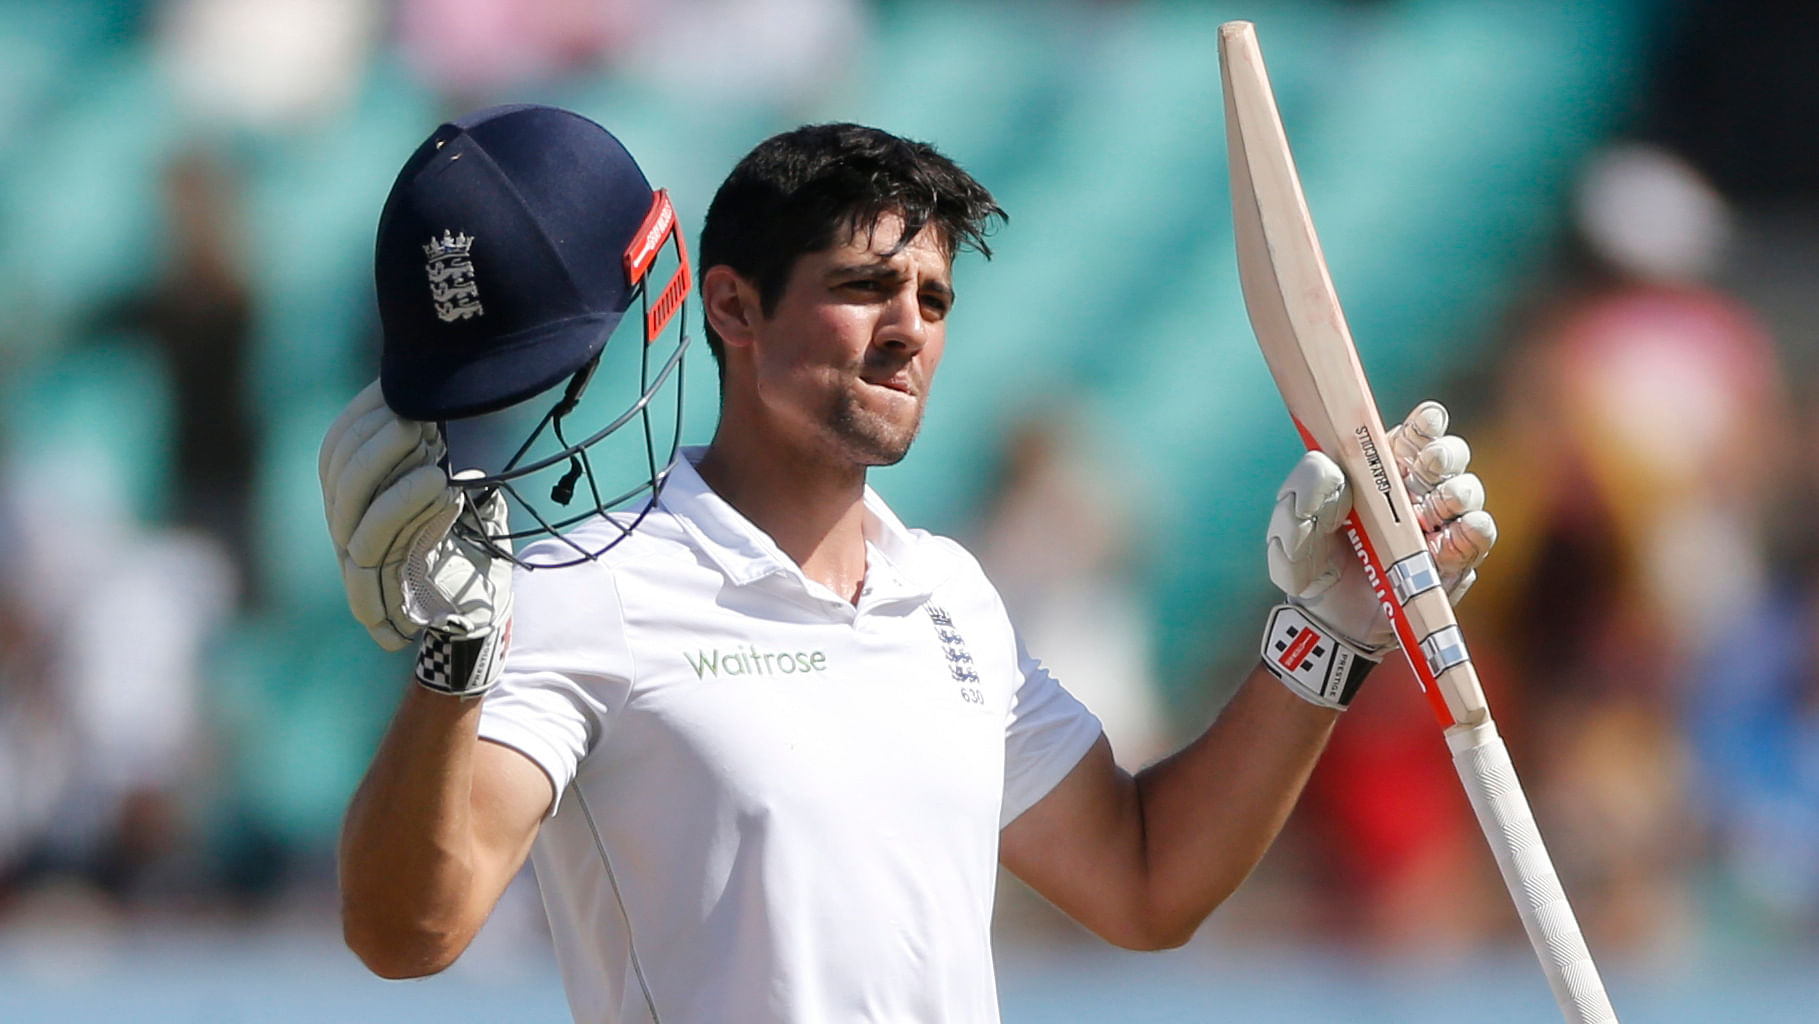 Alastair Cook has announced his decision to retire from international cricket at the end of the ongoing Test series against India.